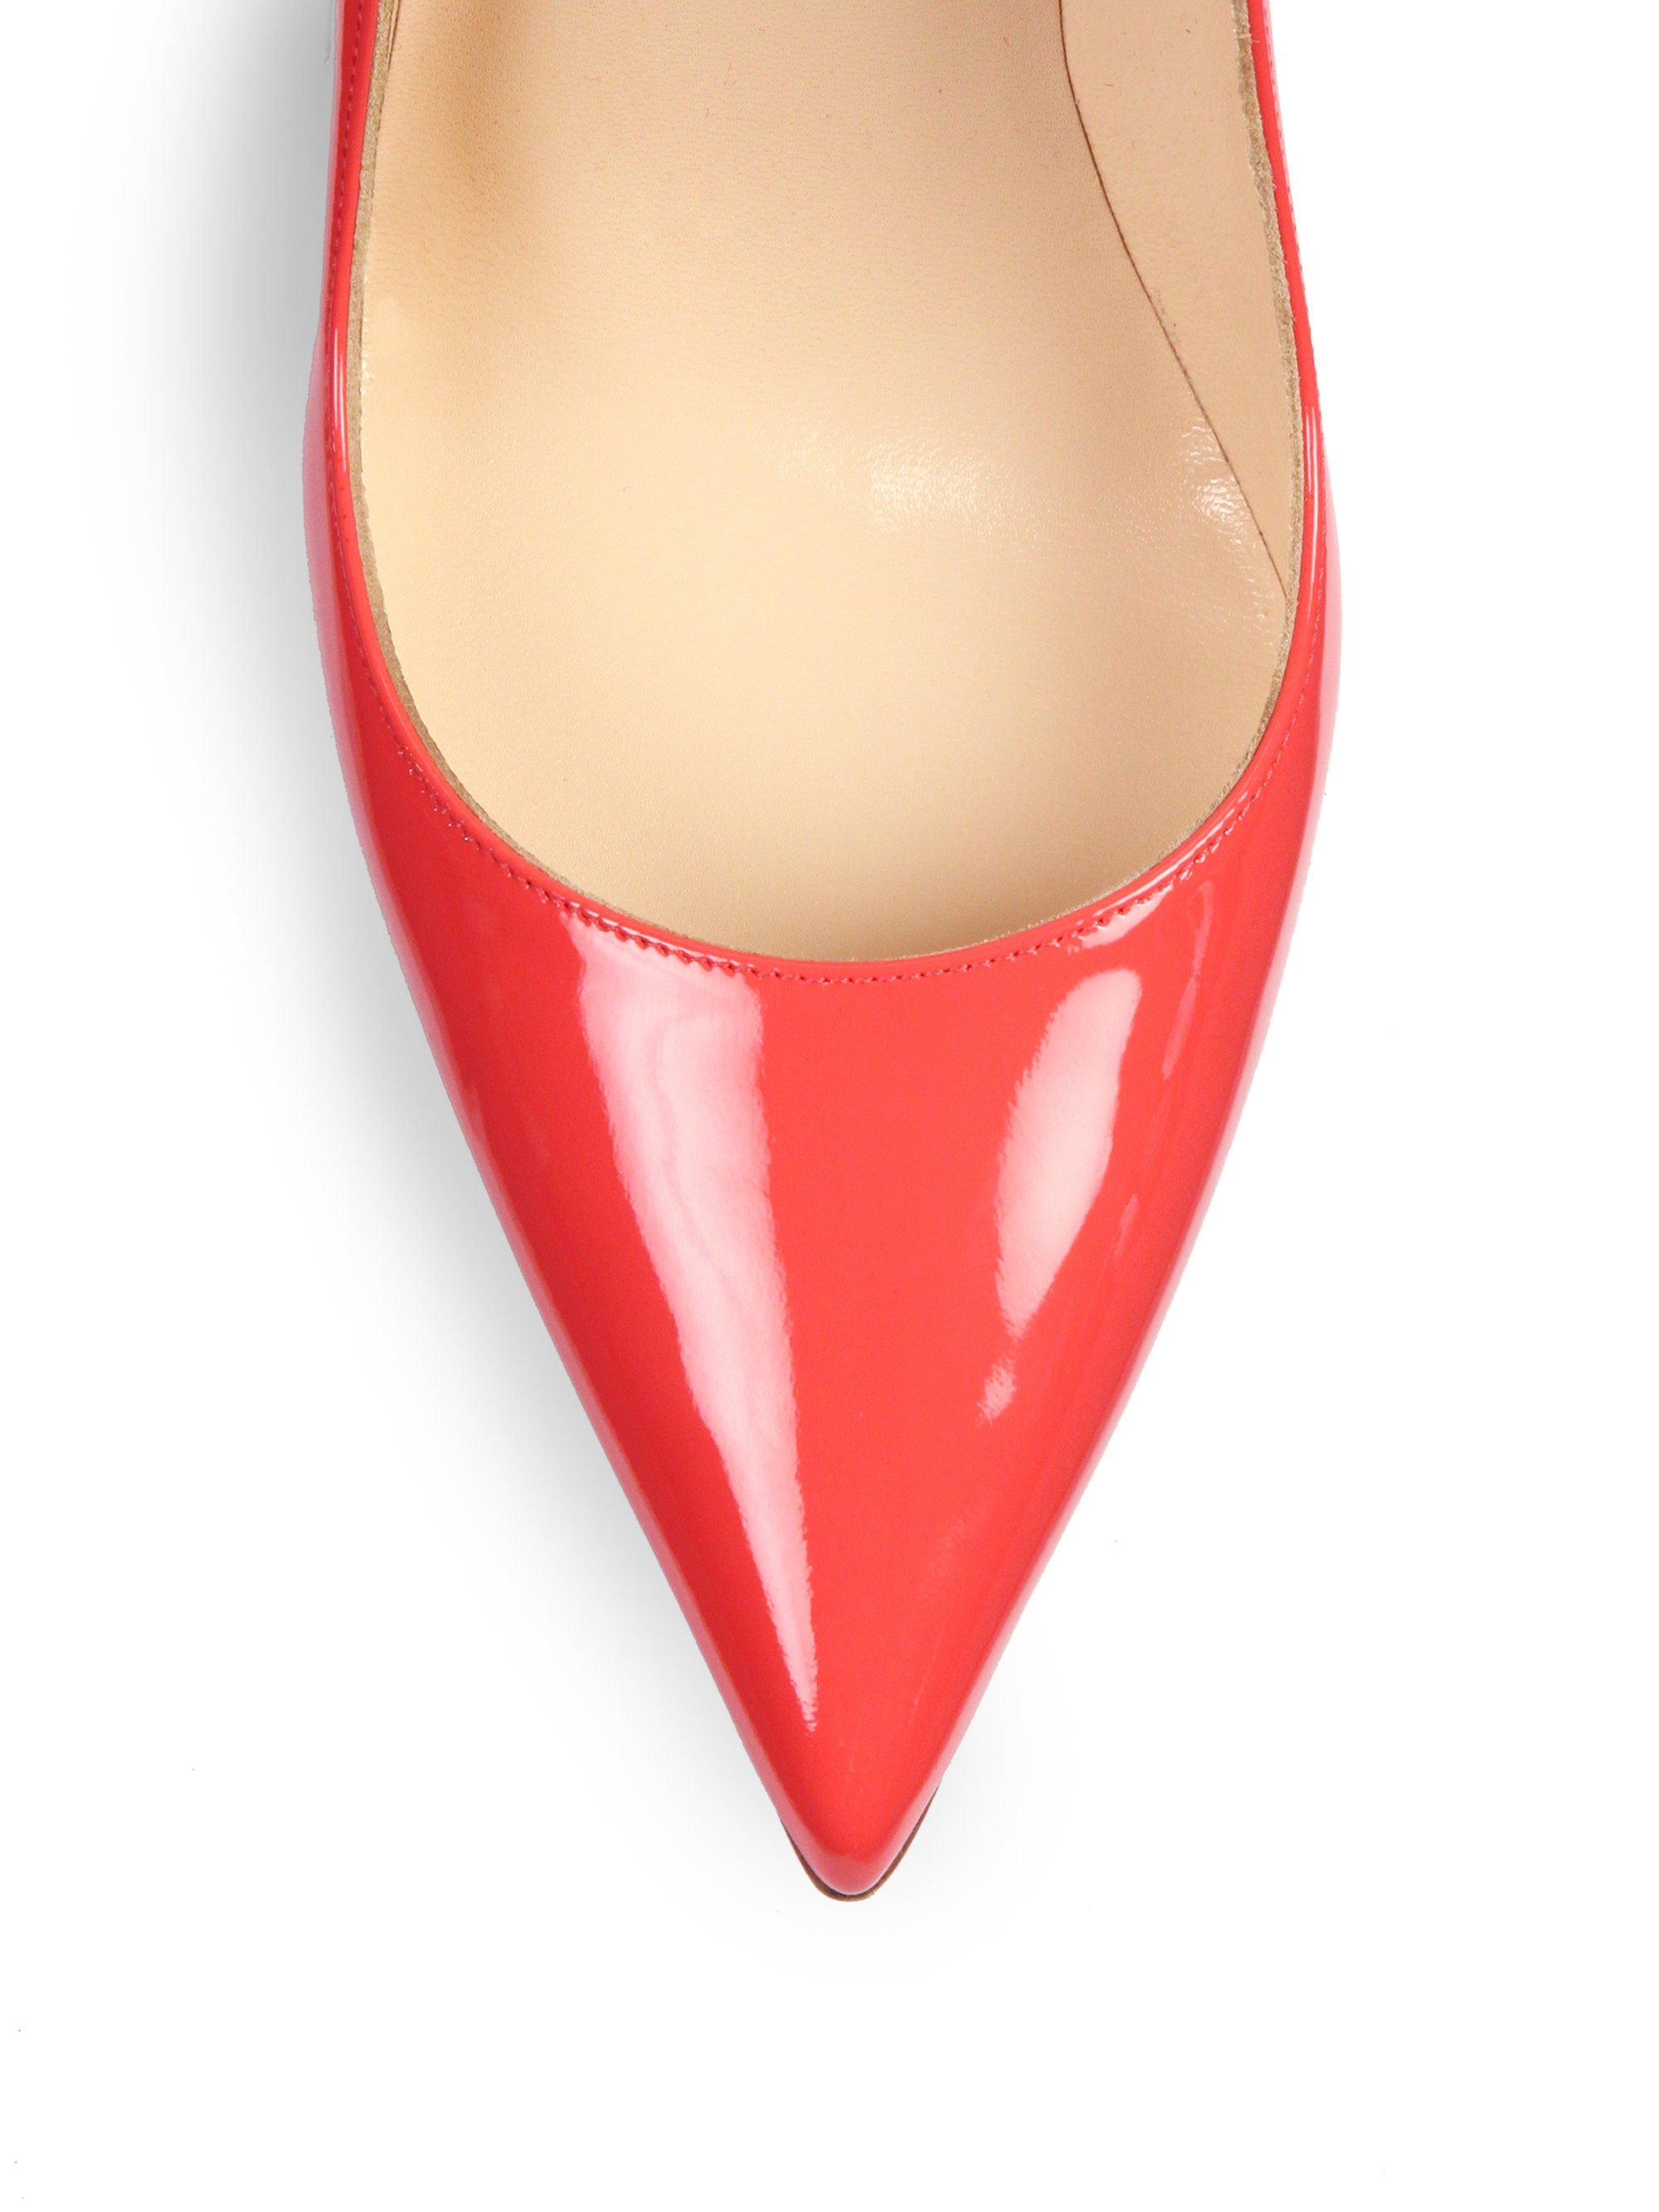 Christian louboutin So Kate Patent Leather Point-Toe Pumps in Red ...